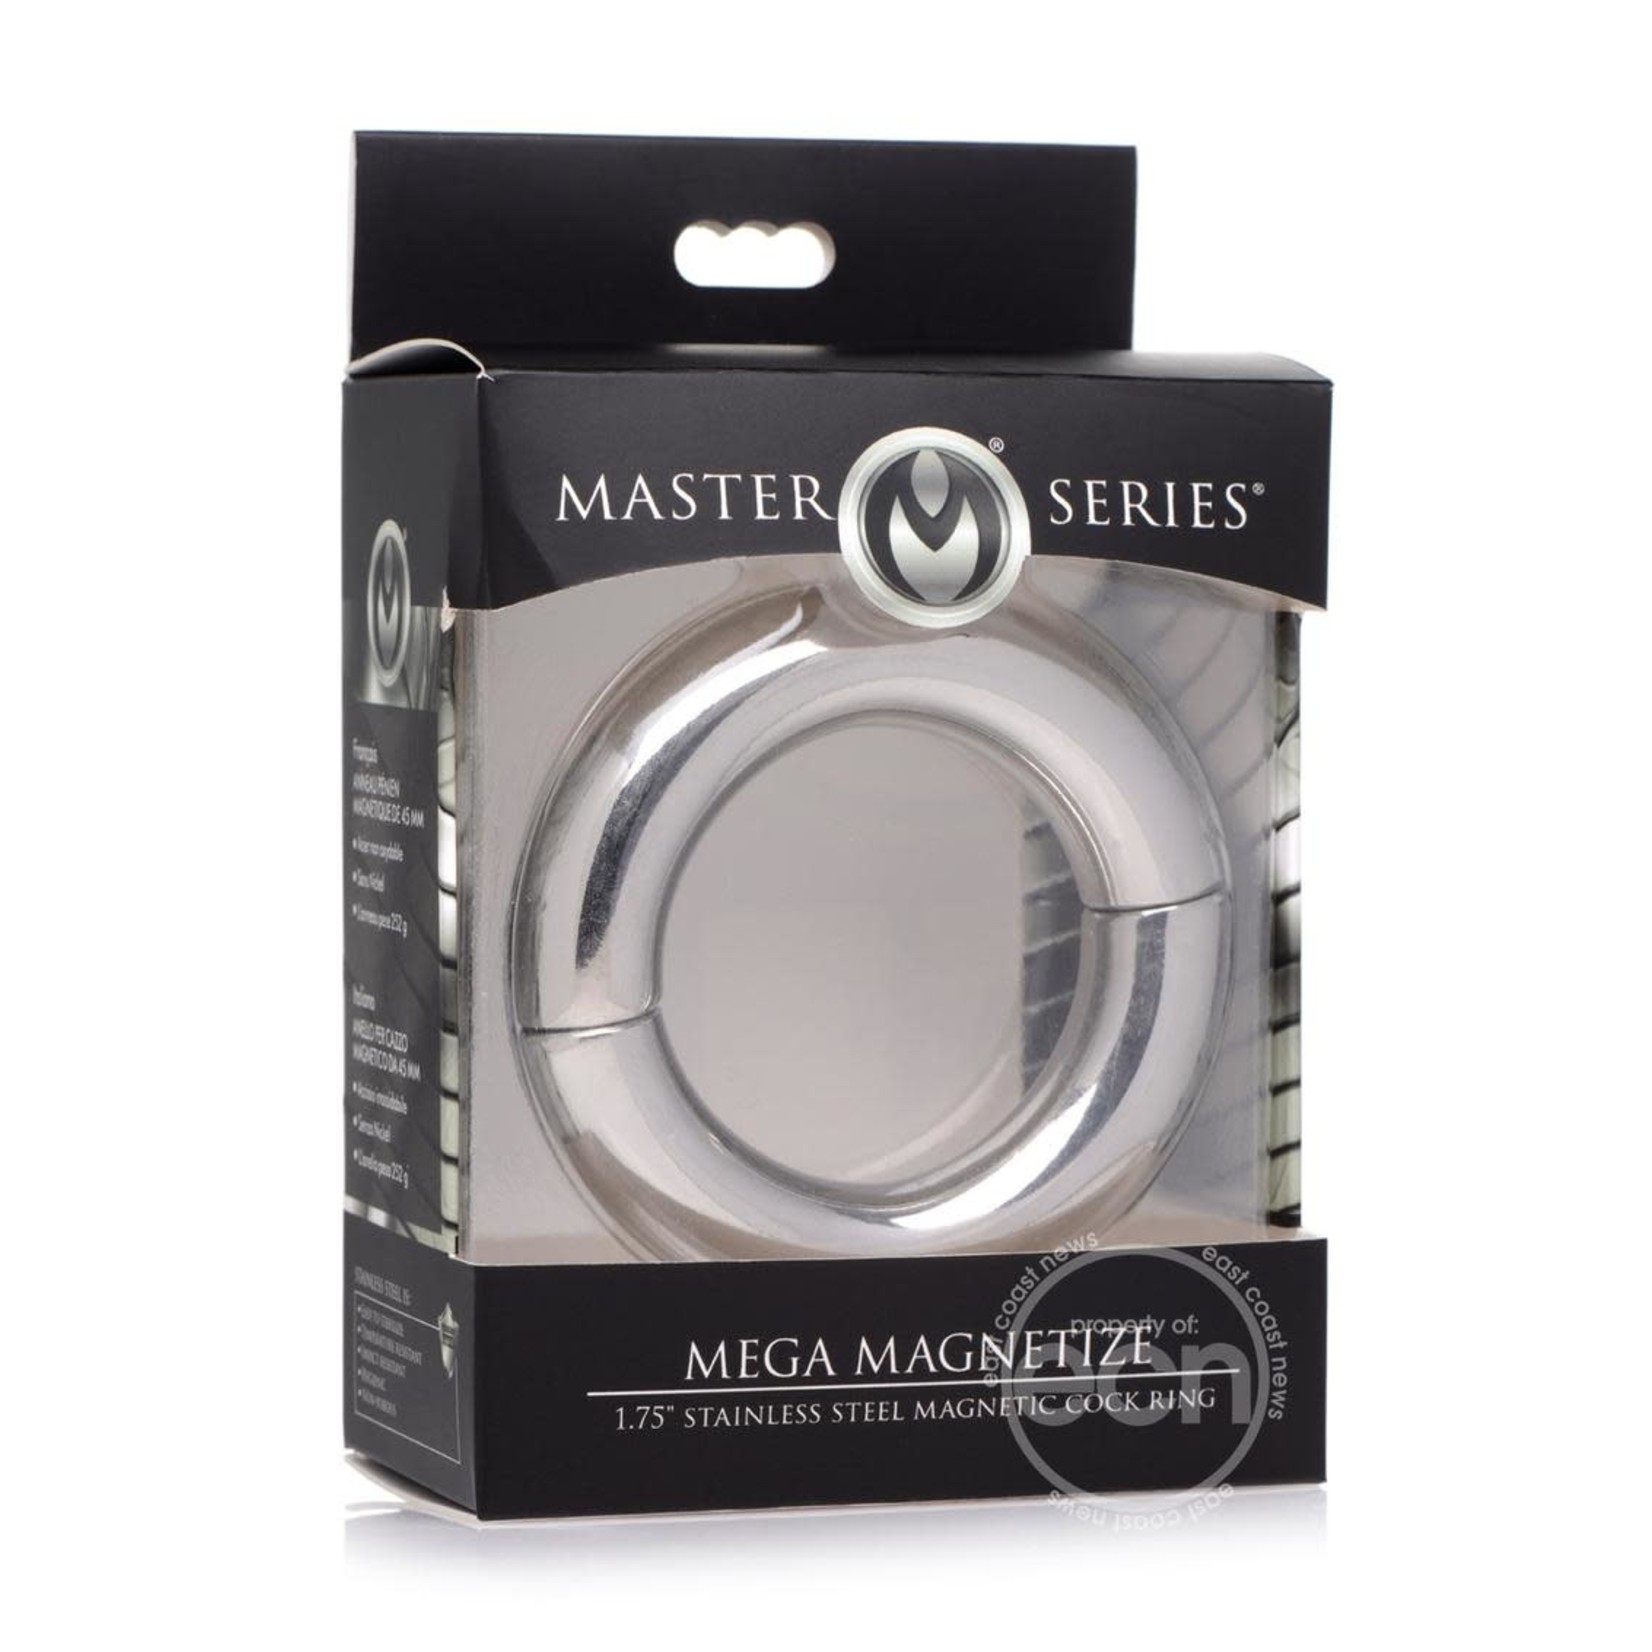 Master Series Mega Magnetize Stainless Steel Cock Ring 1.75in - Silver